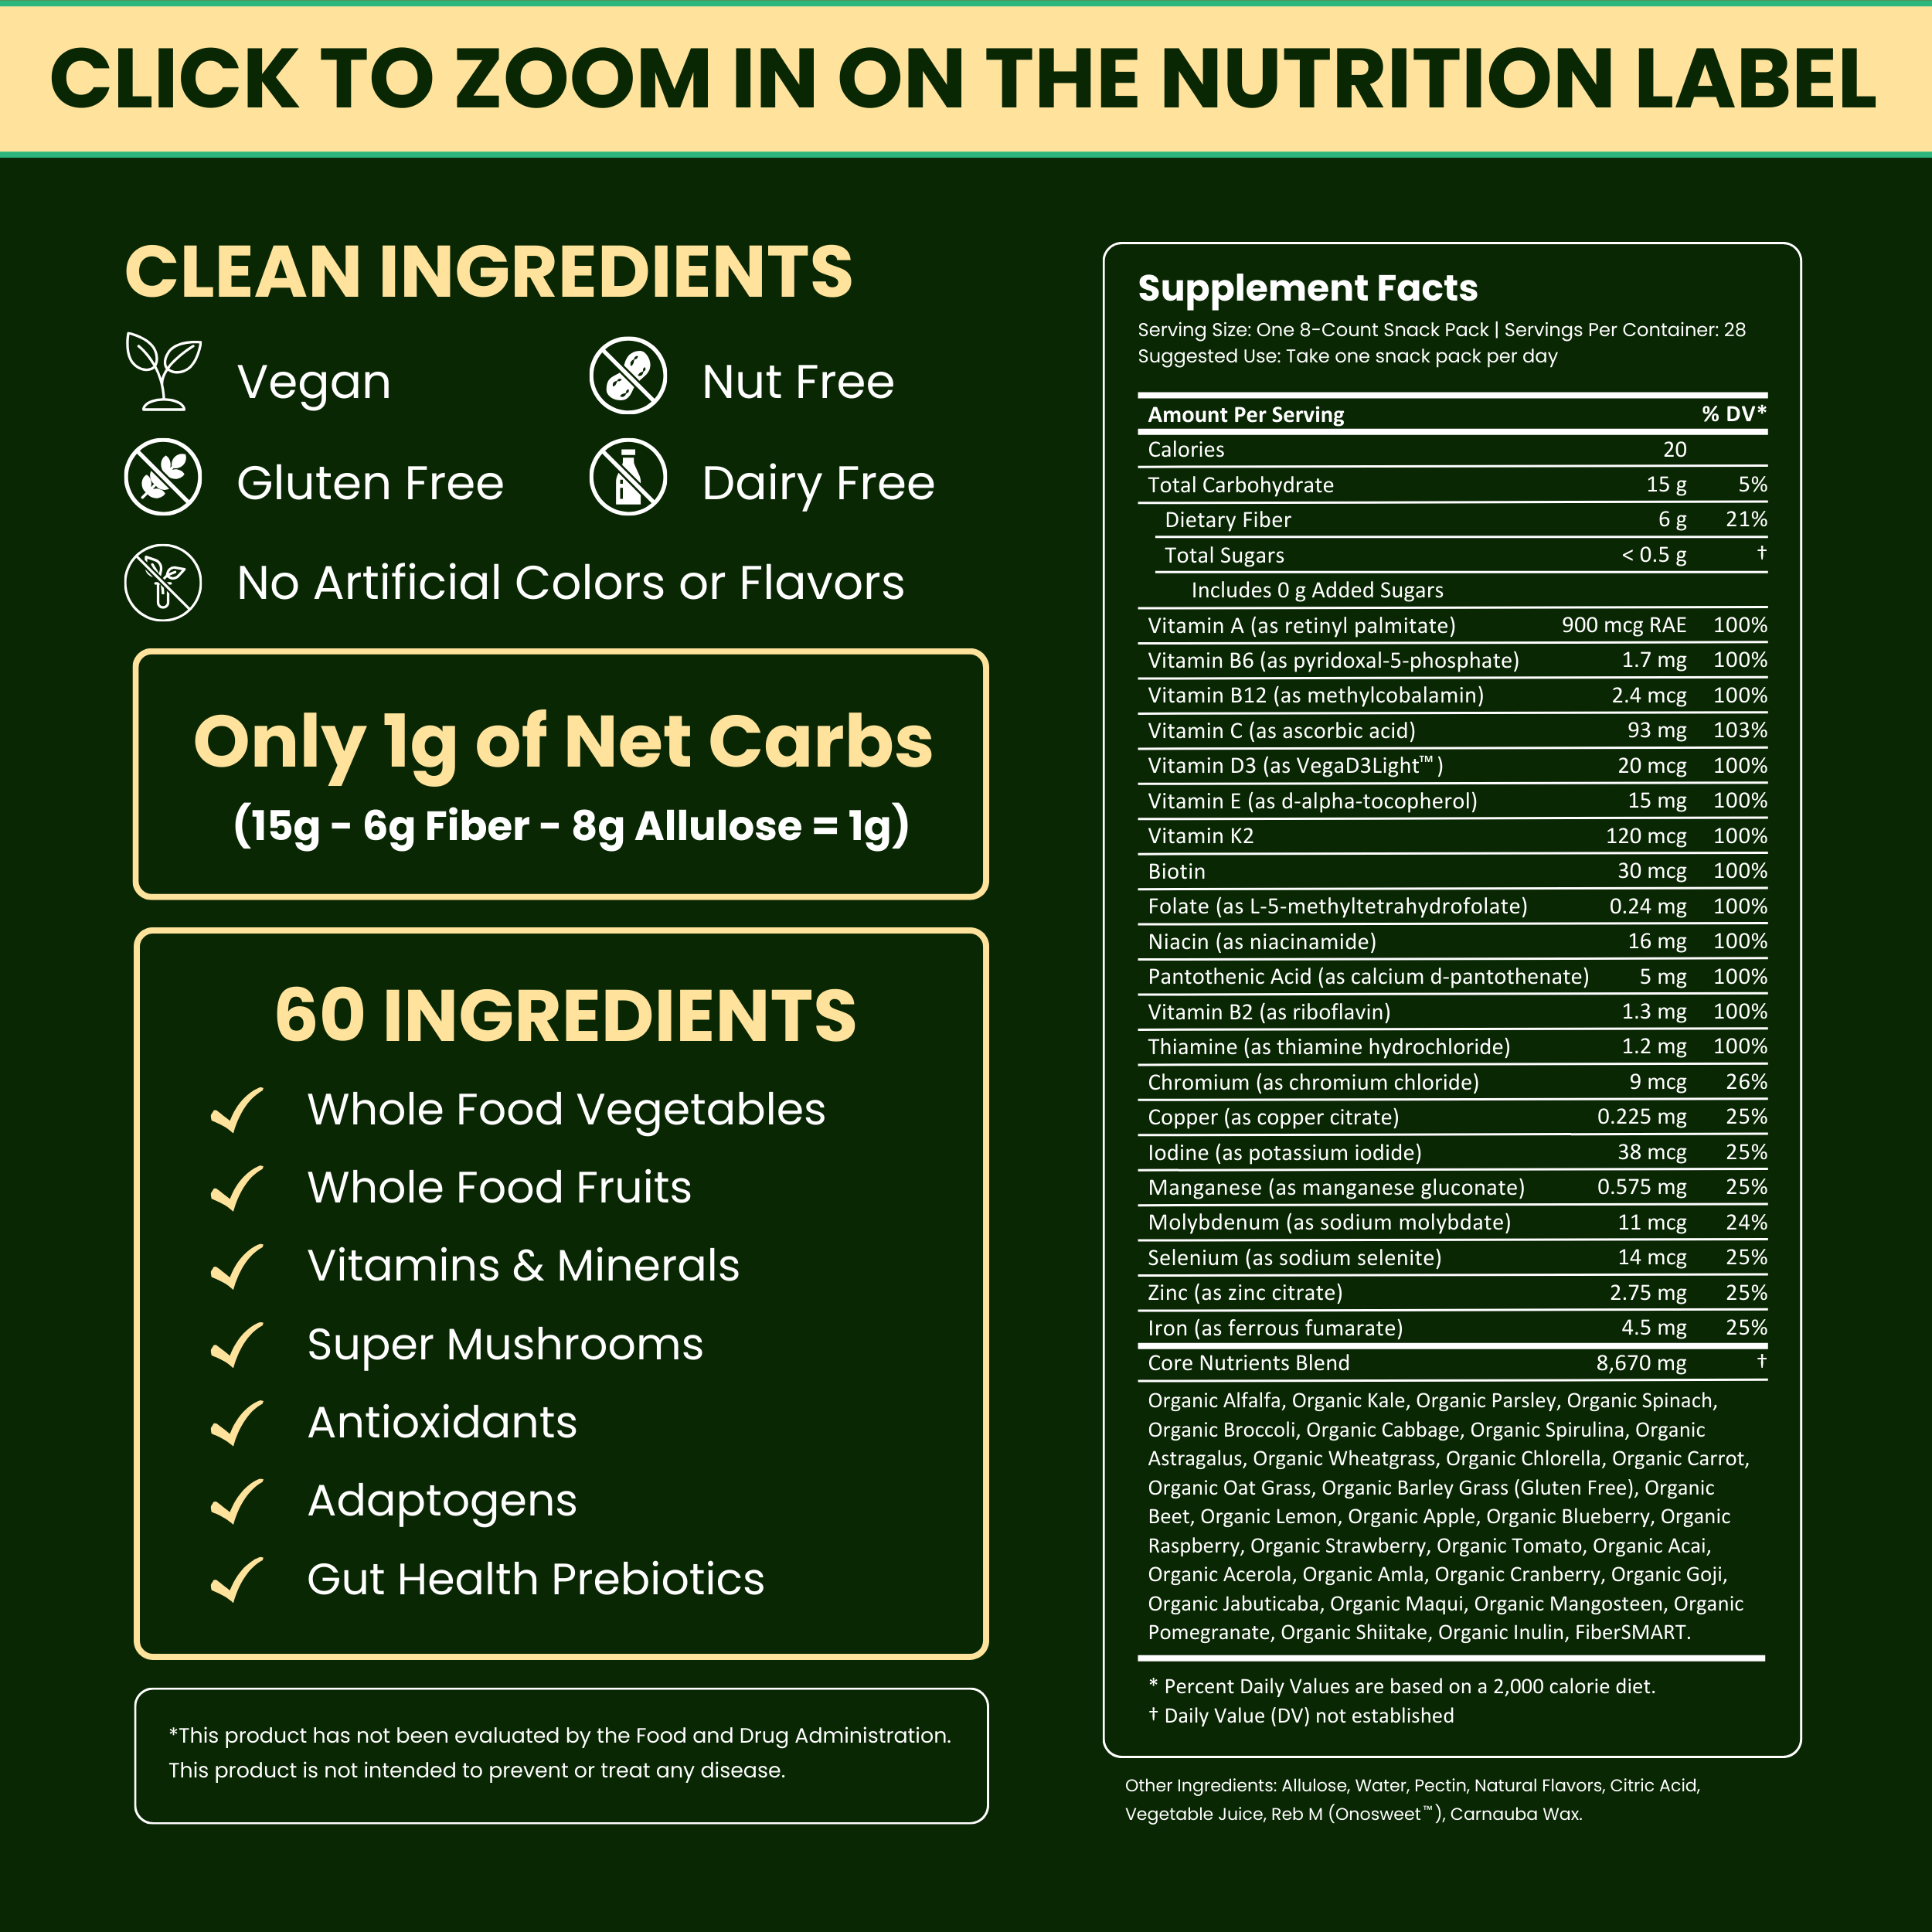 Infographic with dietary information including clean ingredients, only 1g net carbs, 60 ingredients, and nutrition label.